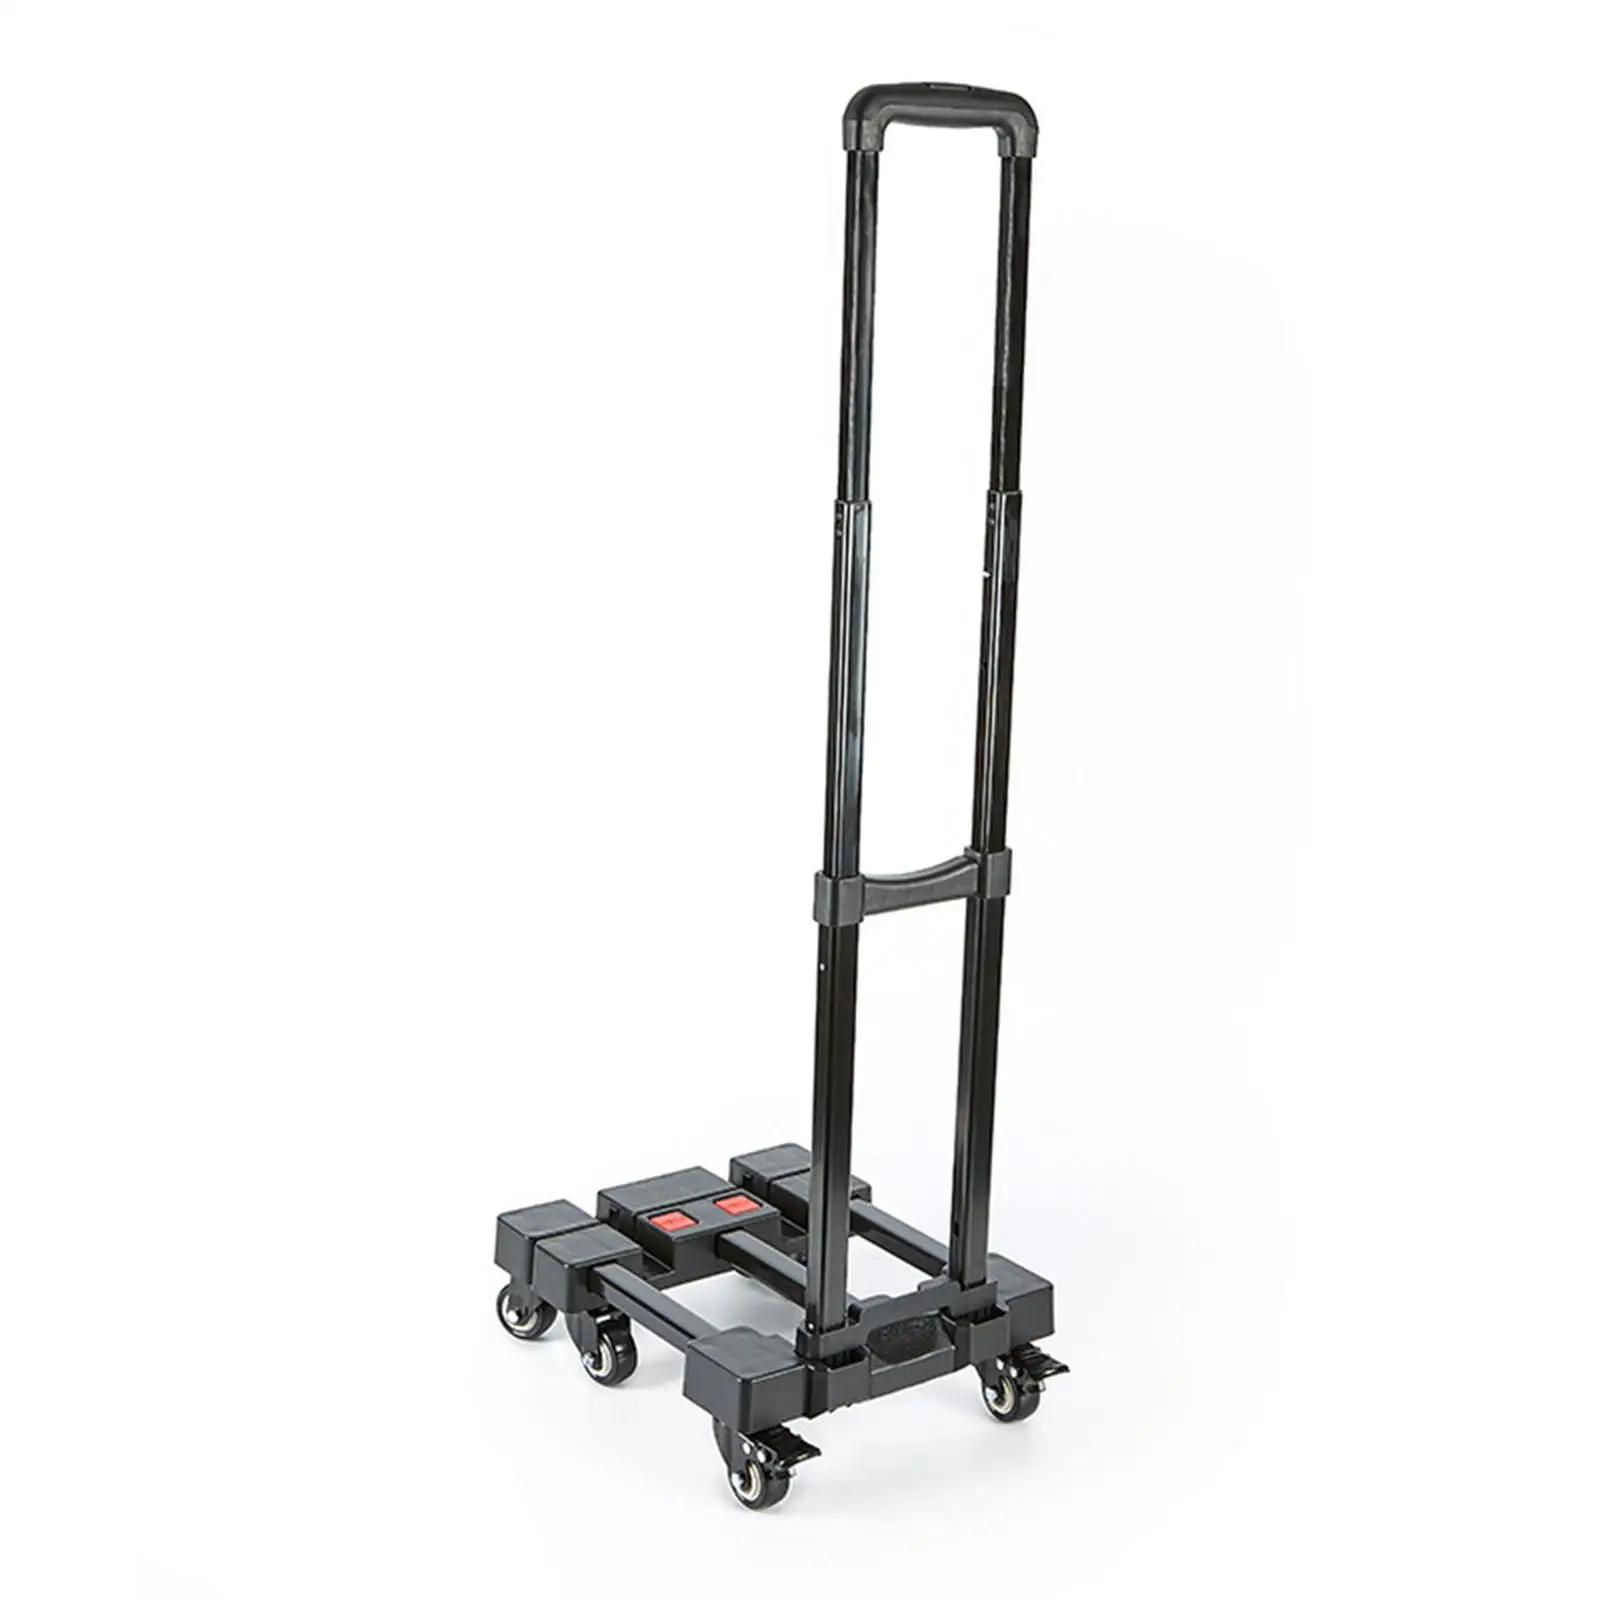 Folding Hand Truck Heavy Duty Sturdy Folding Hand Cart for Easy Moving Transportation Outdoor 100kg (220lb) Load Capacity